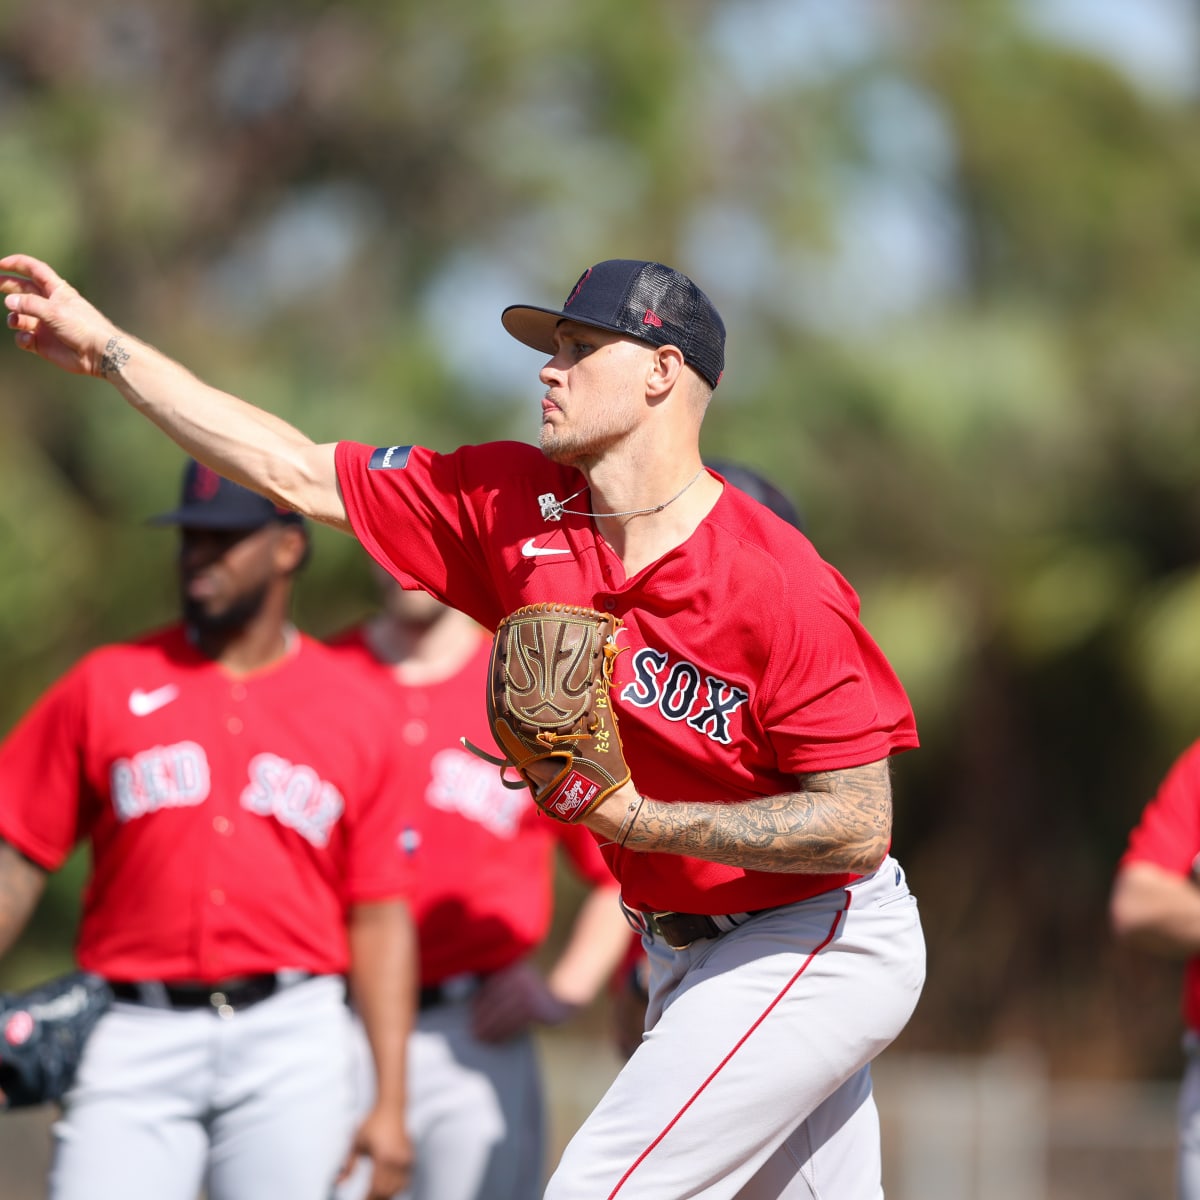 Two Intriguing Hurlers Officially Make Red Sox Opening Day Roster After  Impressive Spring - Sports Illustrated Inside The Red Sox